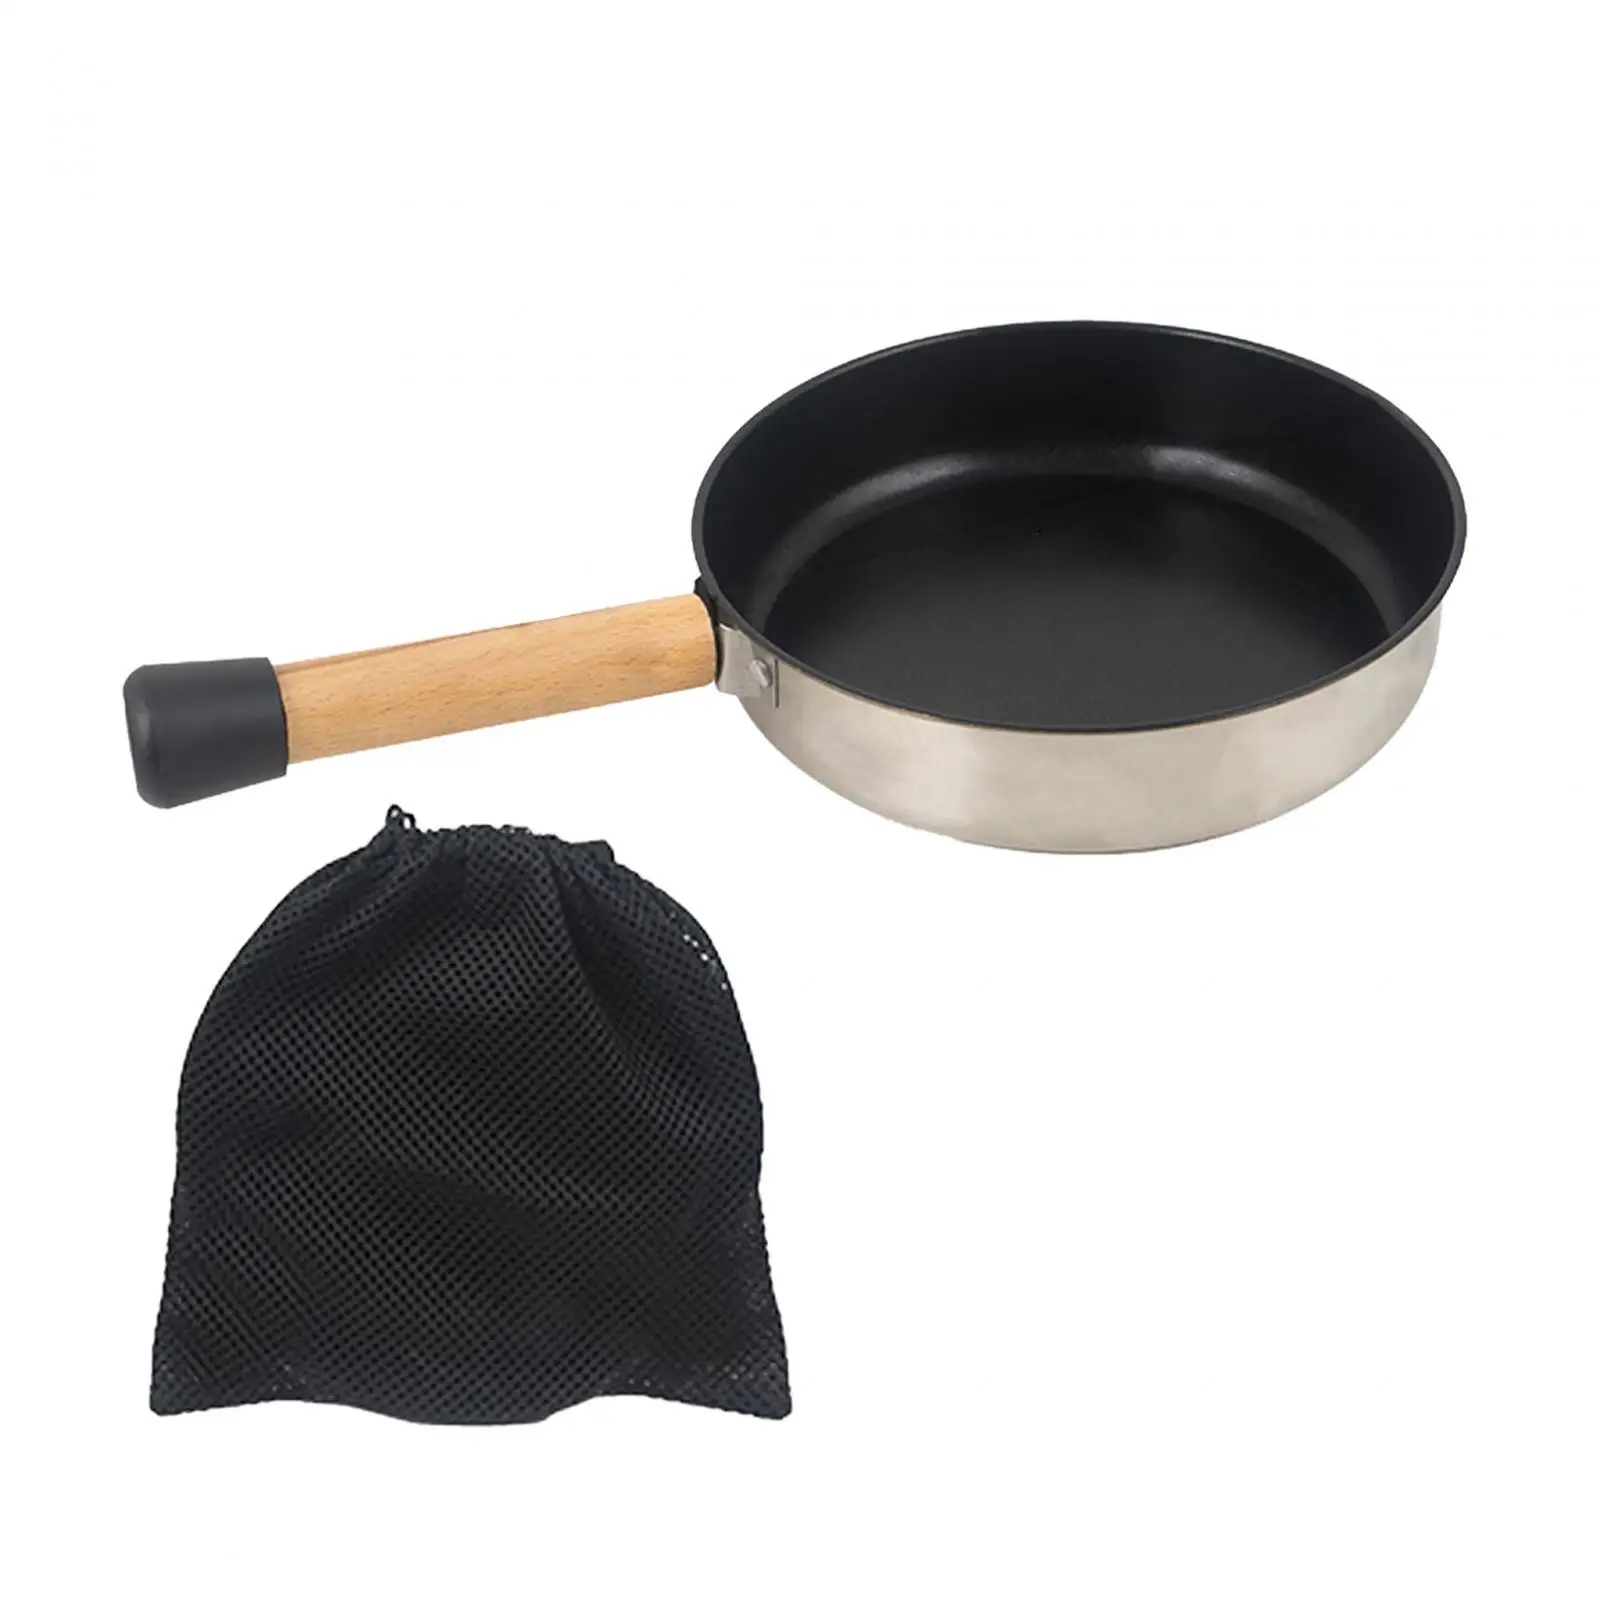 Camping Frying Pan Nonstick Fry Pan Equipment Cooker with Removable Handle Nonstick Flat Griddle Pan for Picnic Camping